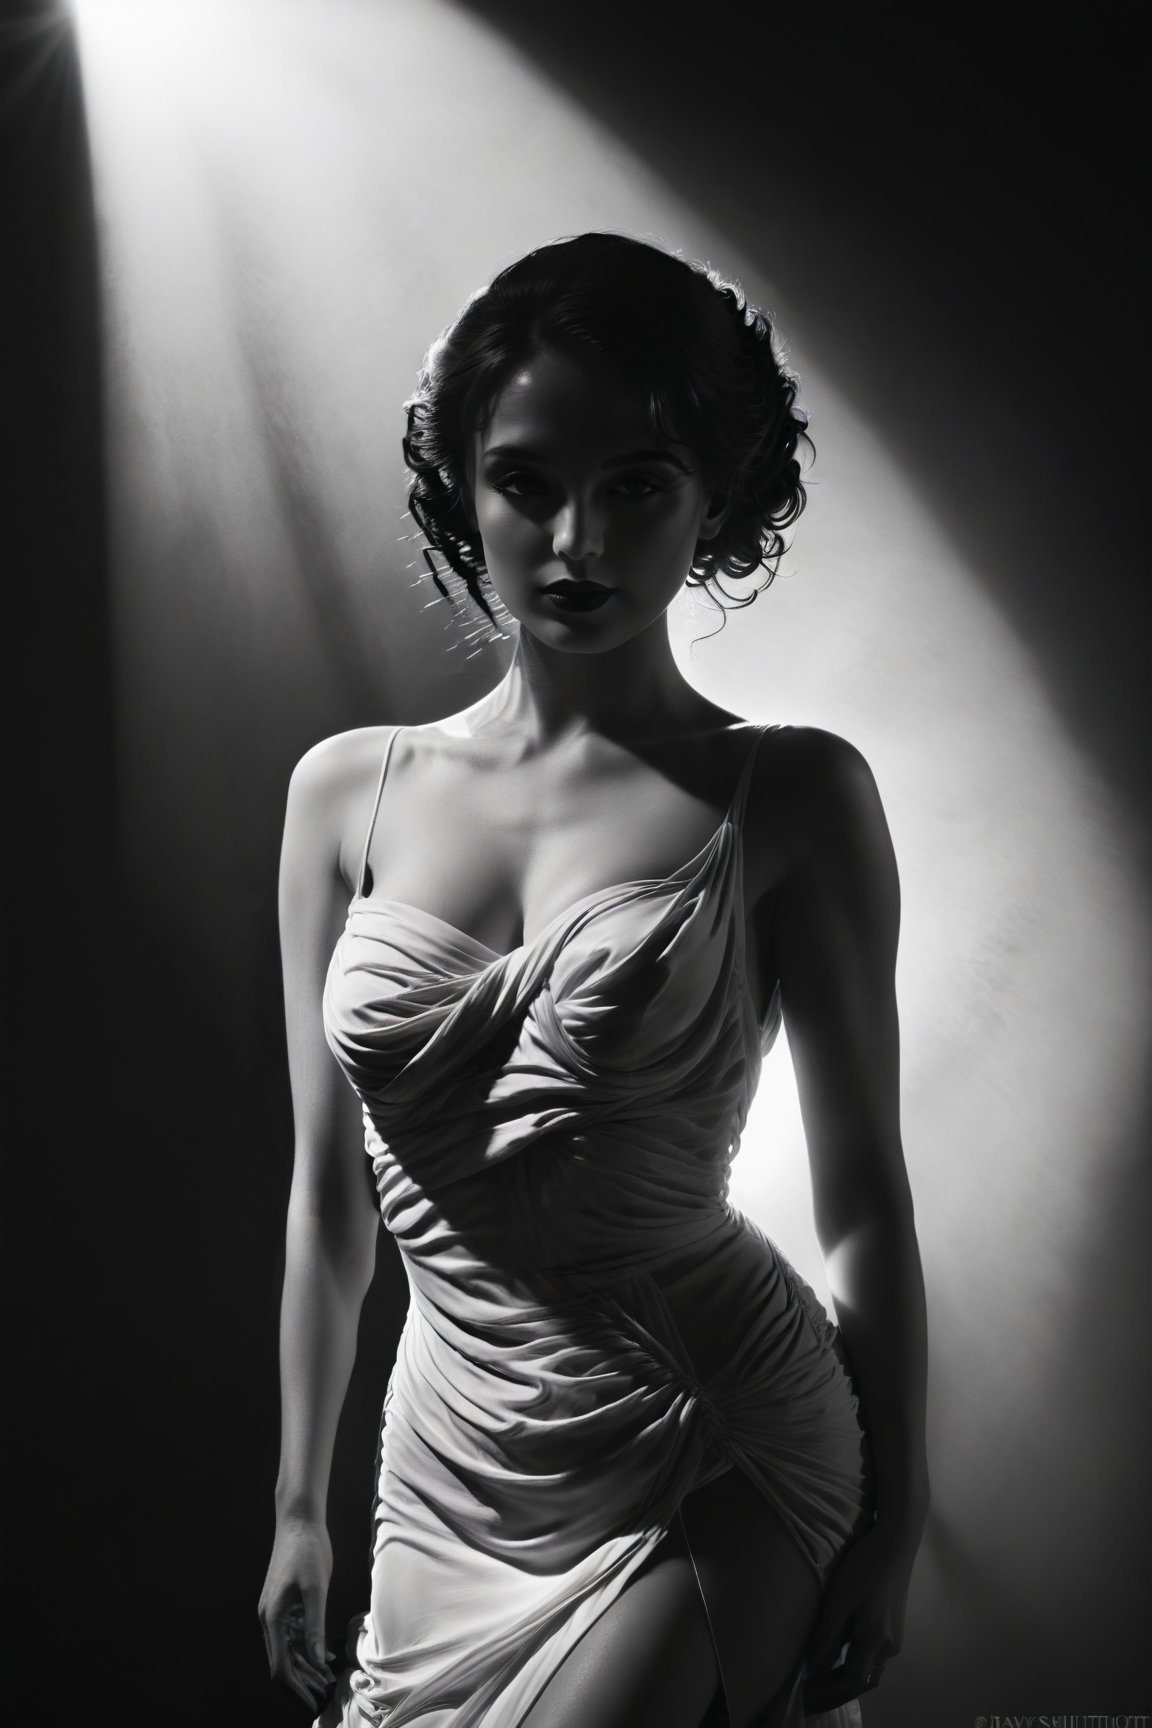 (best quality, 4k, 8k, highres, masterpiece:1.2), ultra-detailed, black and white, shadowy figure, graceful pose, feminine allure, (mysterious,alluring:1.3), eyes and lips, sleek curves, ravishing beauty, artistic expression, dramatic lighting, contrast, subtle details, implied sensuality, twisted silhouette, dark elegance, mood, fluid lines, high contrast, fine art, monochome, contemporary, sophisticated, innovative, silhouette, visual poetry, creative composition, striking visual impact, unique Masterpiece, (masterpiece:1.2), (best quality:1.2), ai-generated, ultra-detailed, best shadow, detailed background, high contrast, (best illumination, an extremely delicate and beautiful), ((cinematic light)), hyper detail, dramatic light, intricate details, 8k, very aesthetic,monochrome,halsman